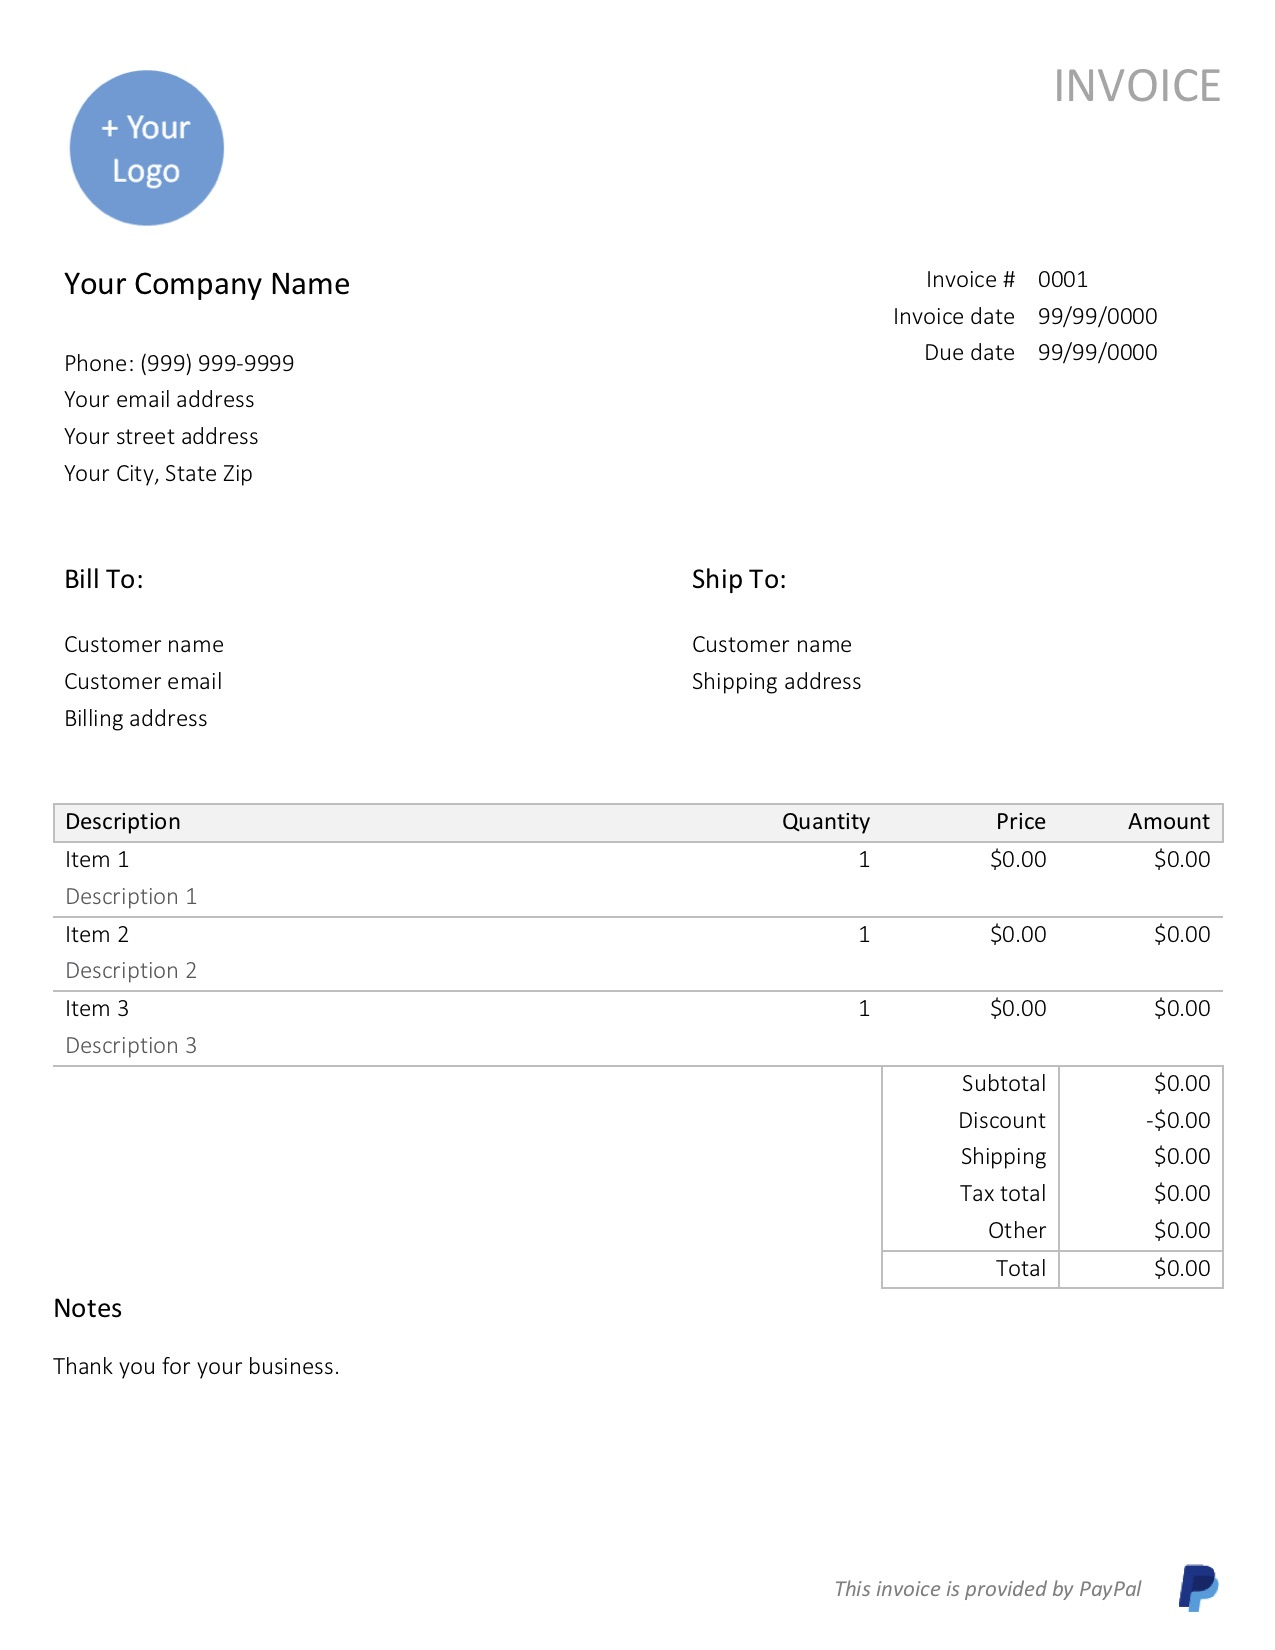 Free, Downloadable Sample Invoice Template | Paypal with regard to How To Write A Invoice Template